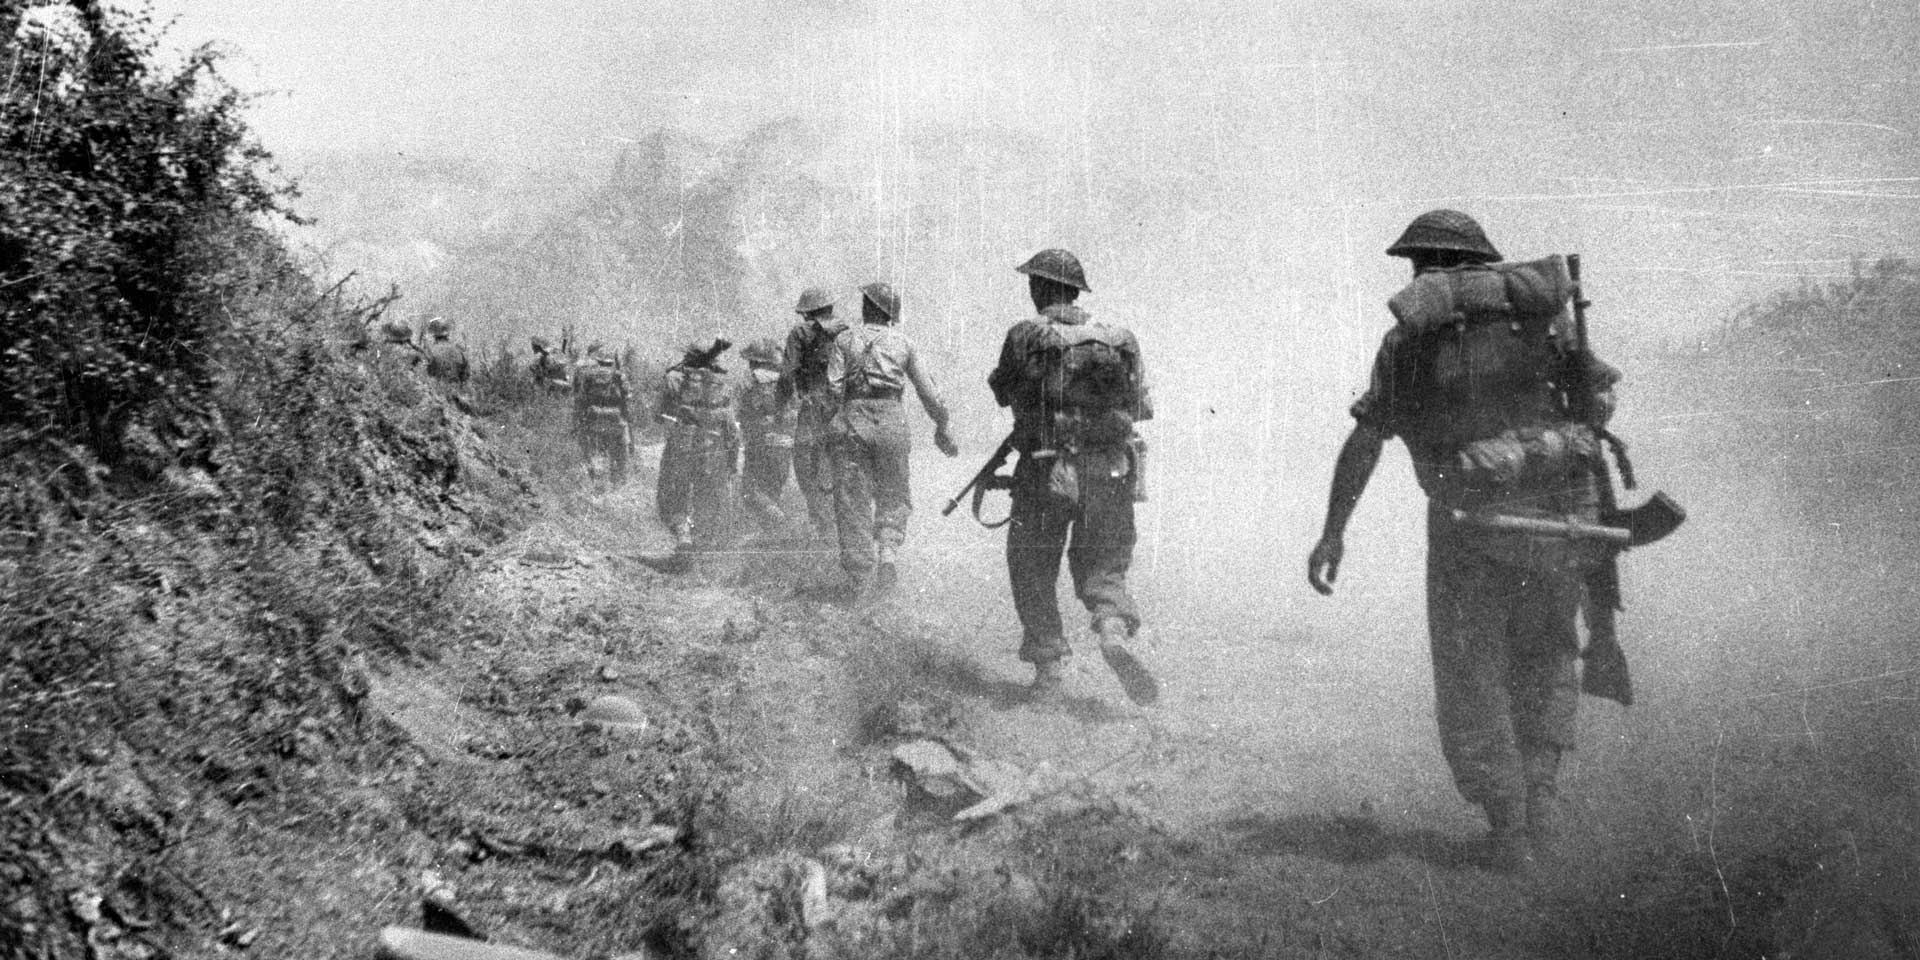 British troops moving into Cassino through a smoke screen, Italy, 1944